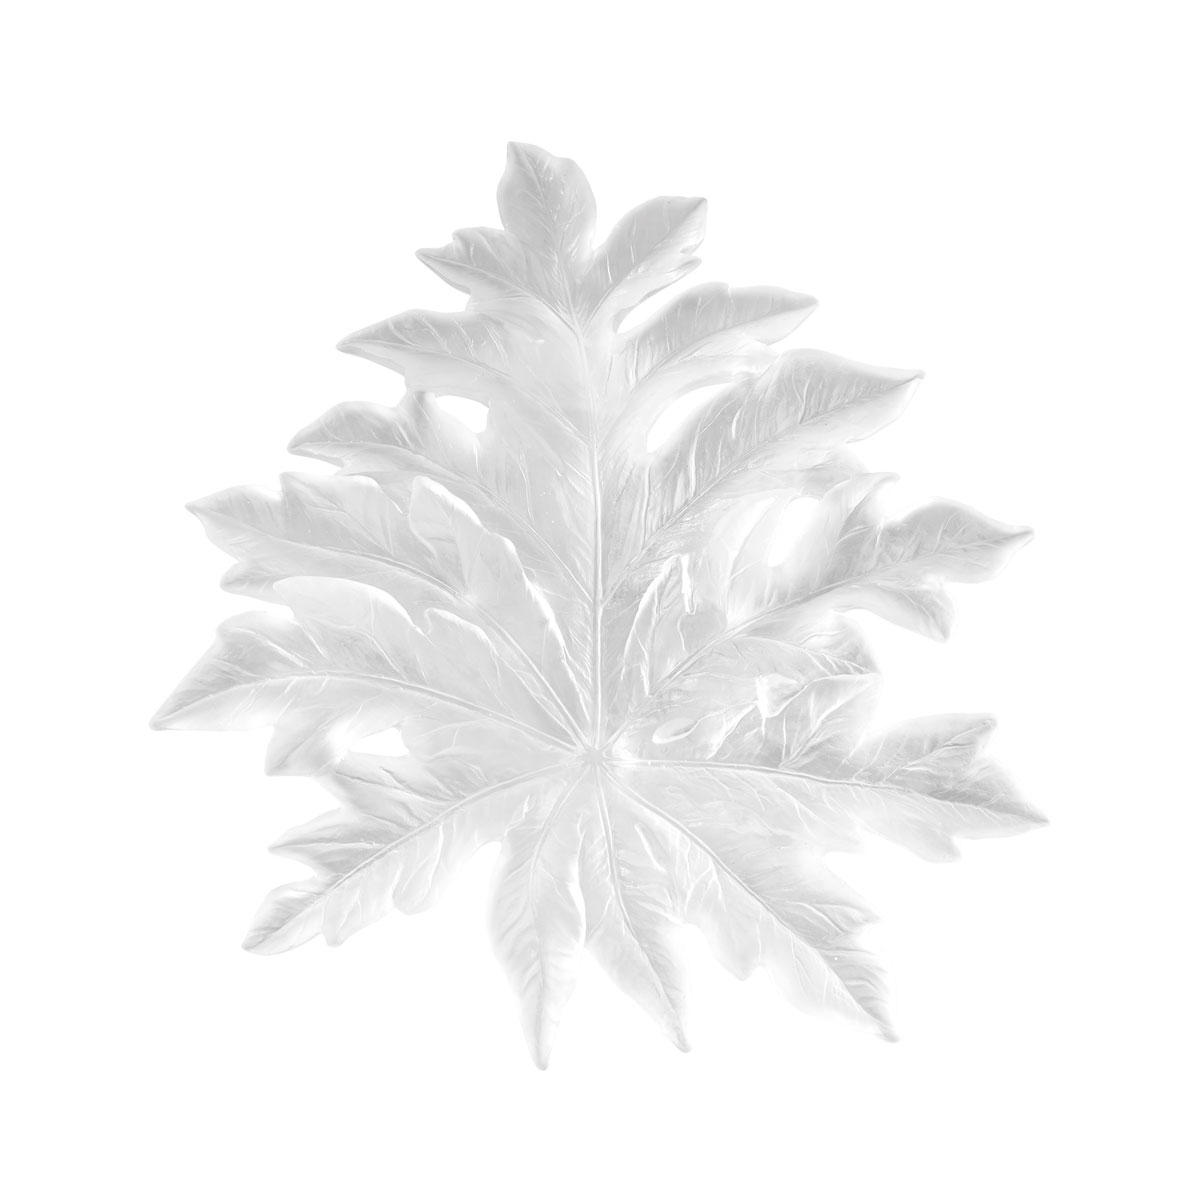 Daum Large Borneo Wall Leaf in White by Emilio Robba, Sconce